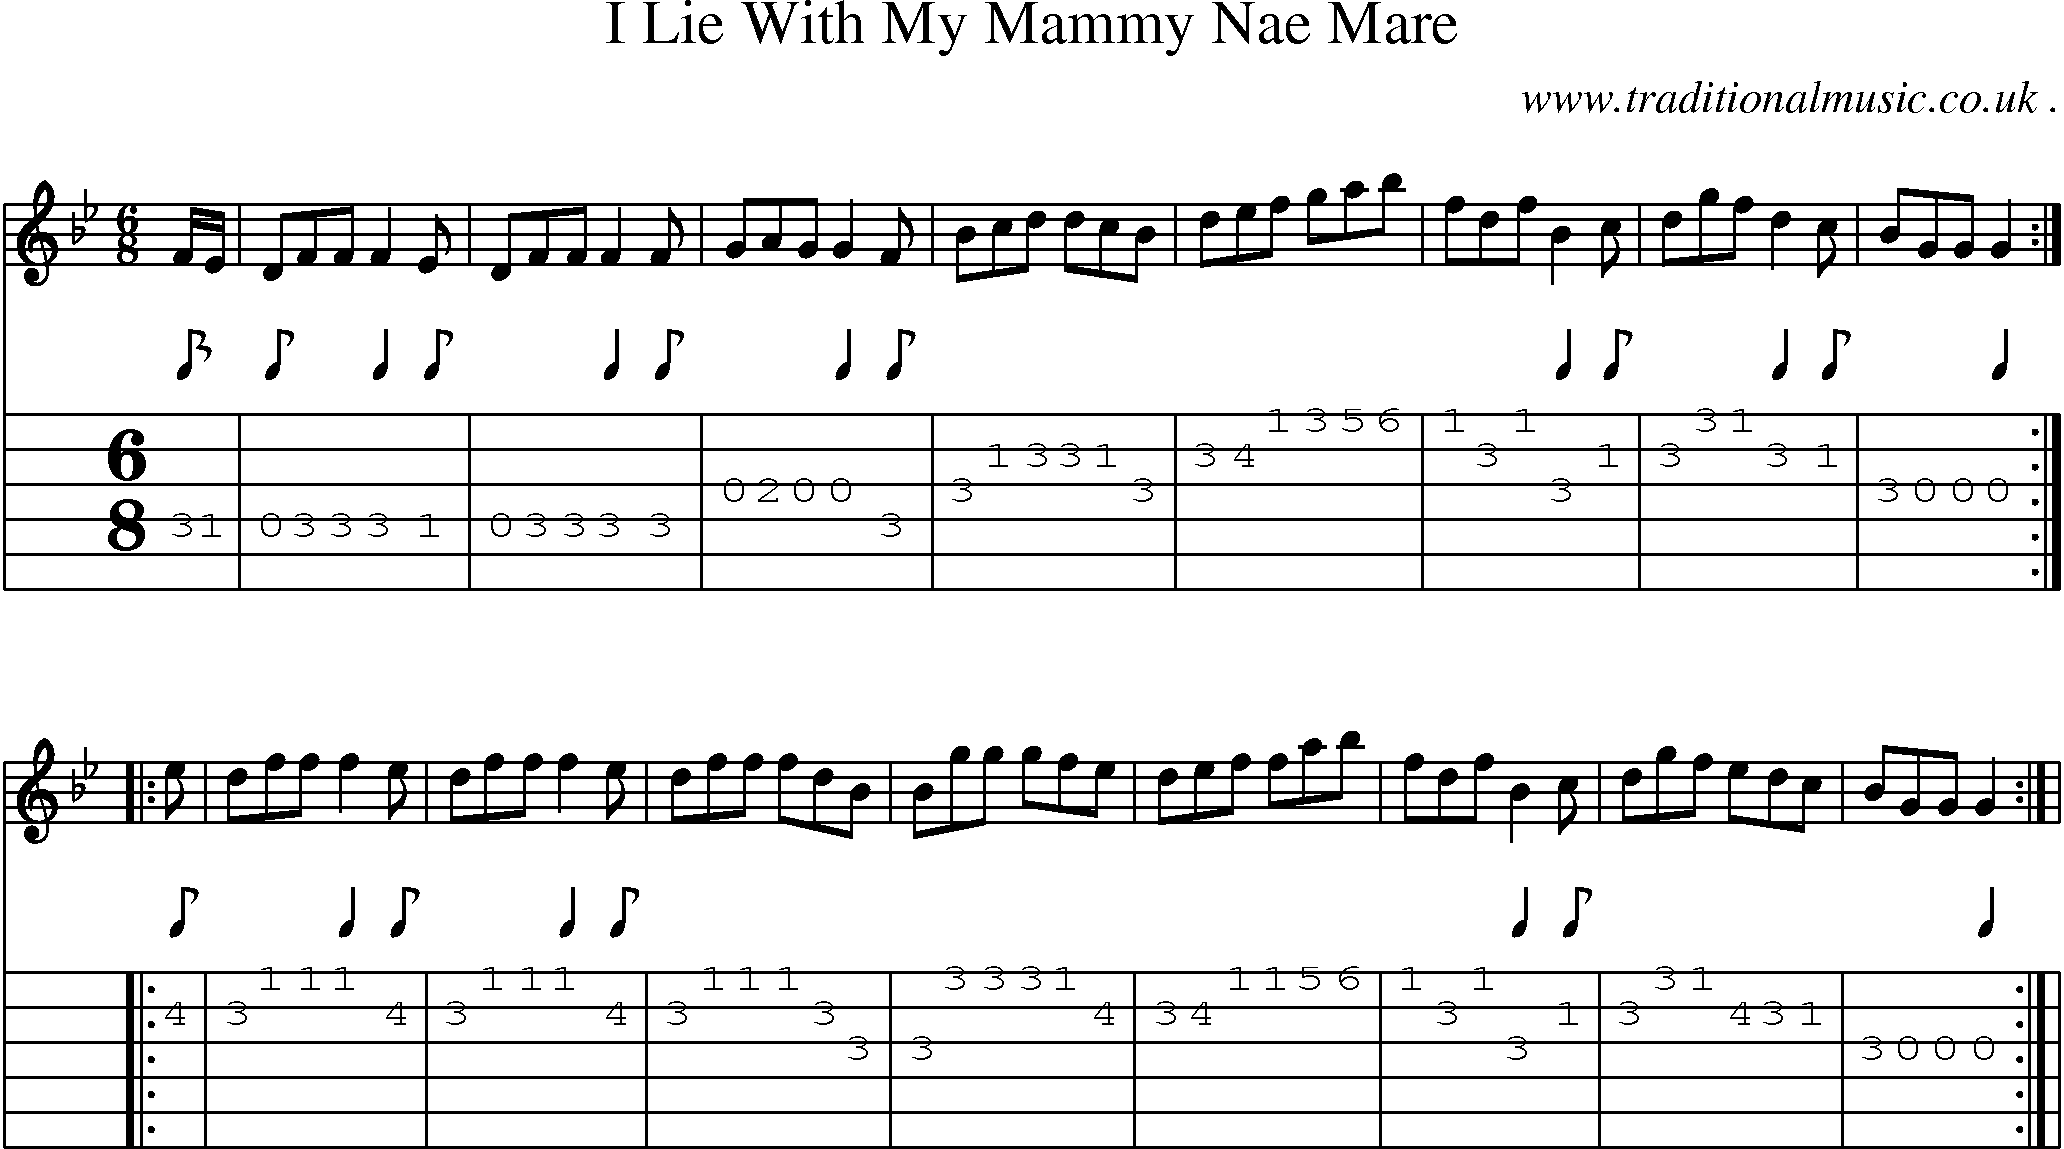 Sheet-Music and Guitar Tabs for I Lie With My Mammy Nae Mare